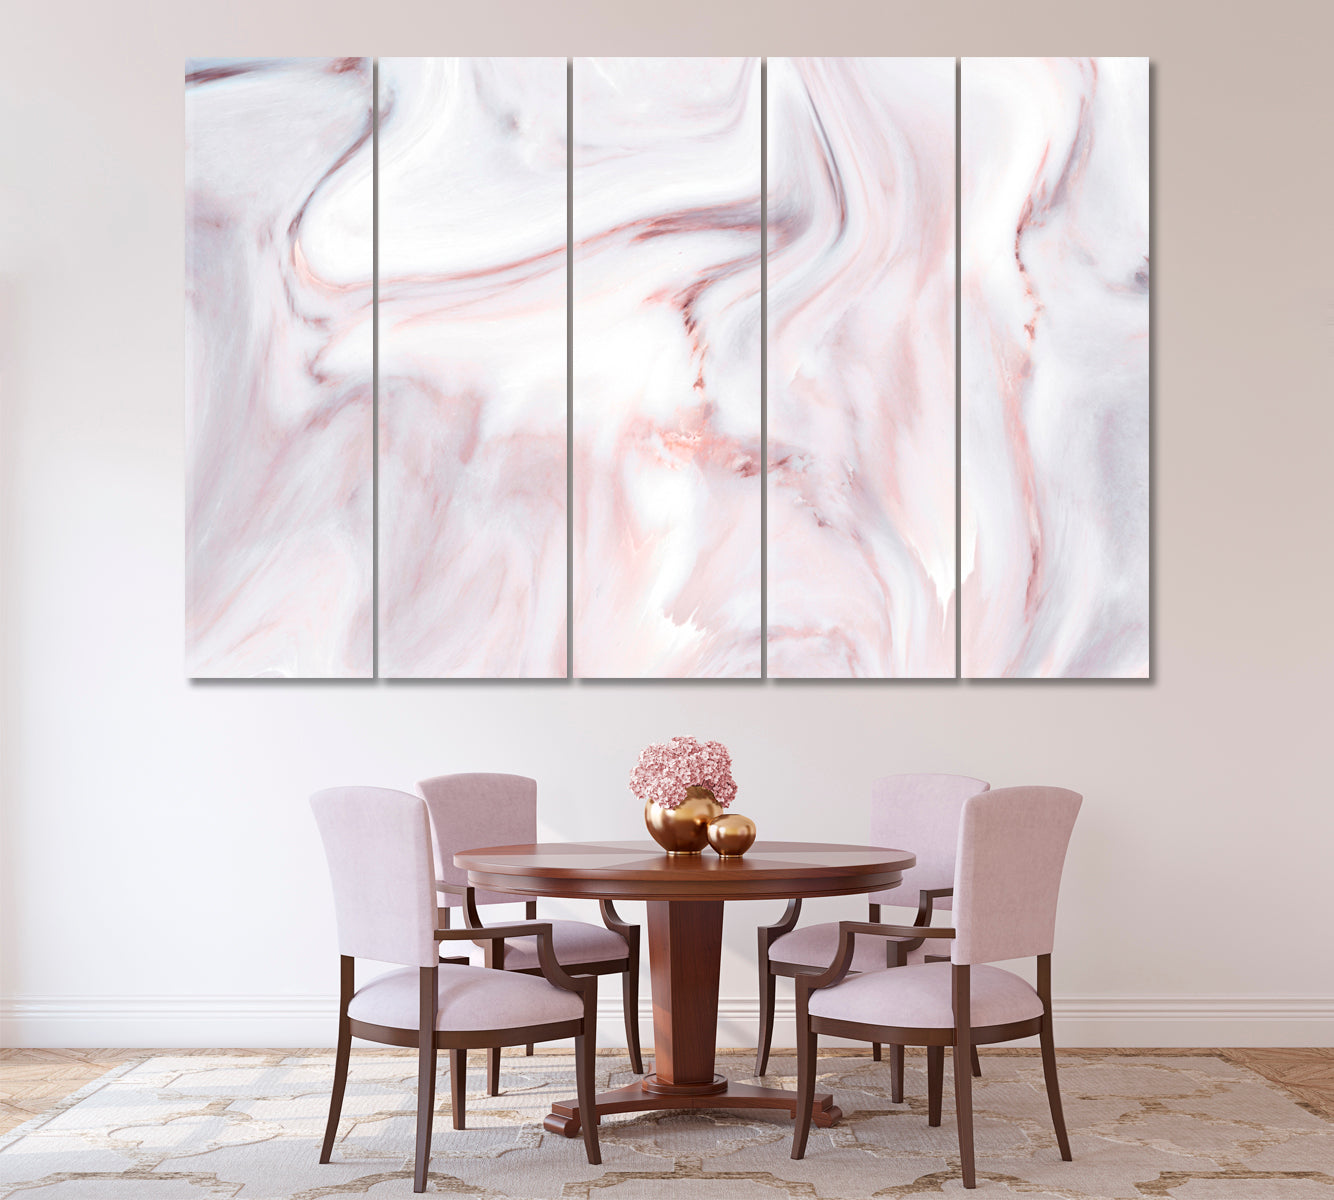 Abstract Pink Marble Pattern Canvas Print ArtLexy 5 Panels 36"x24" inches 